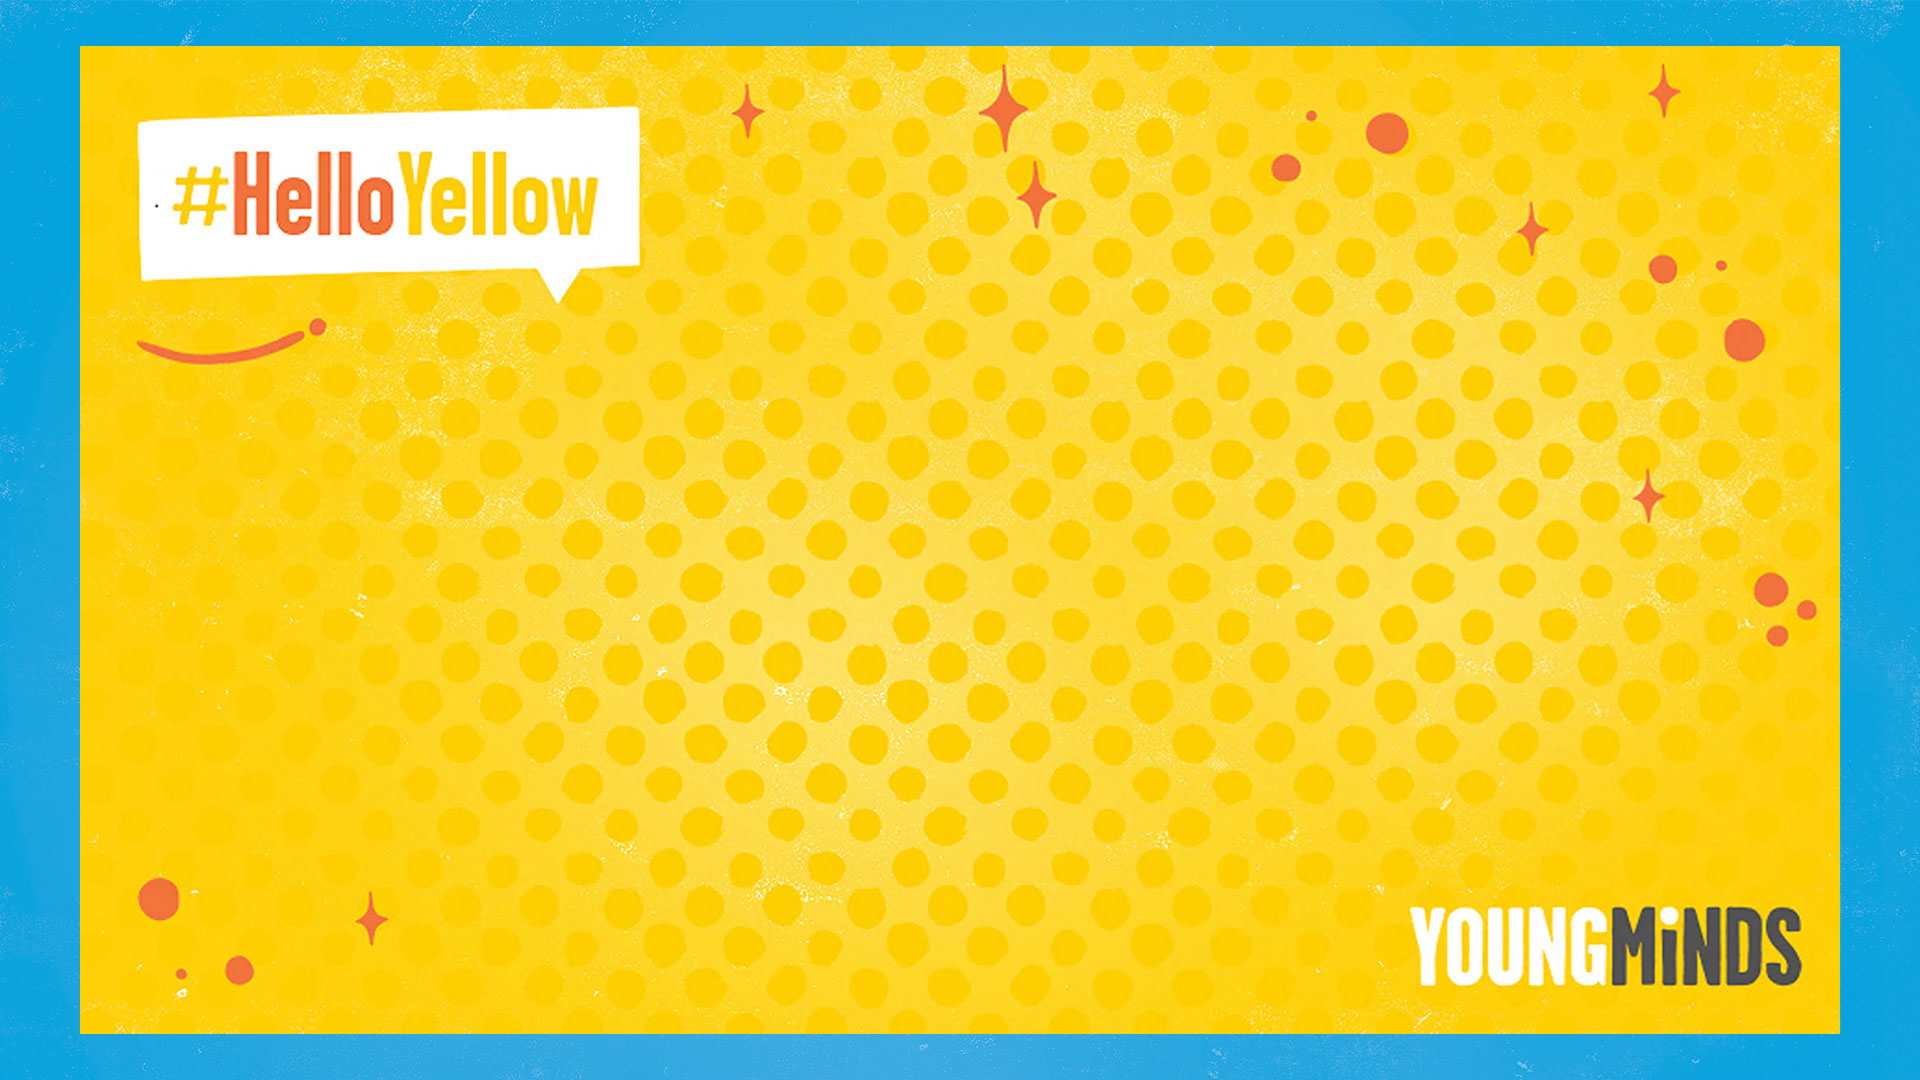 An image of Our #HelloYellow background in yellow with Young Minds logo